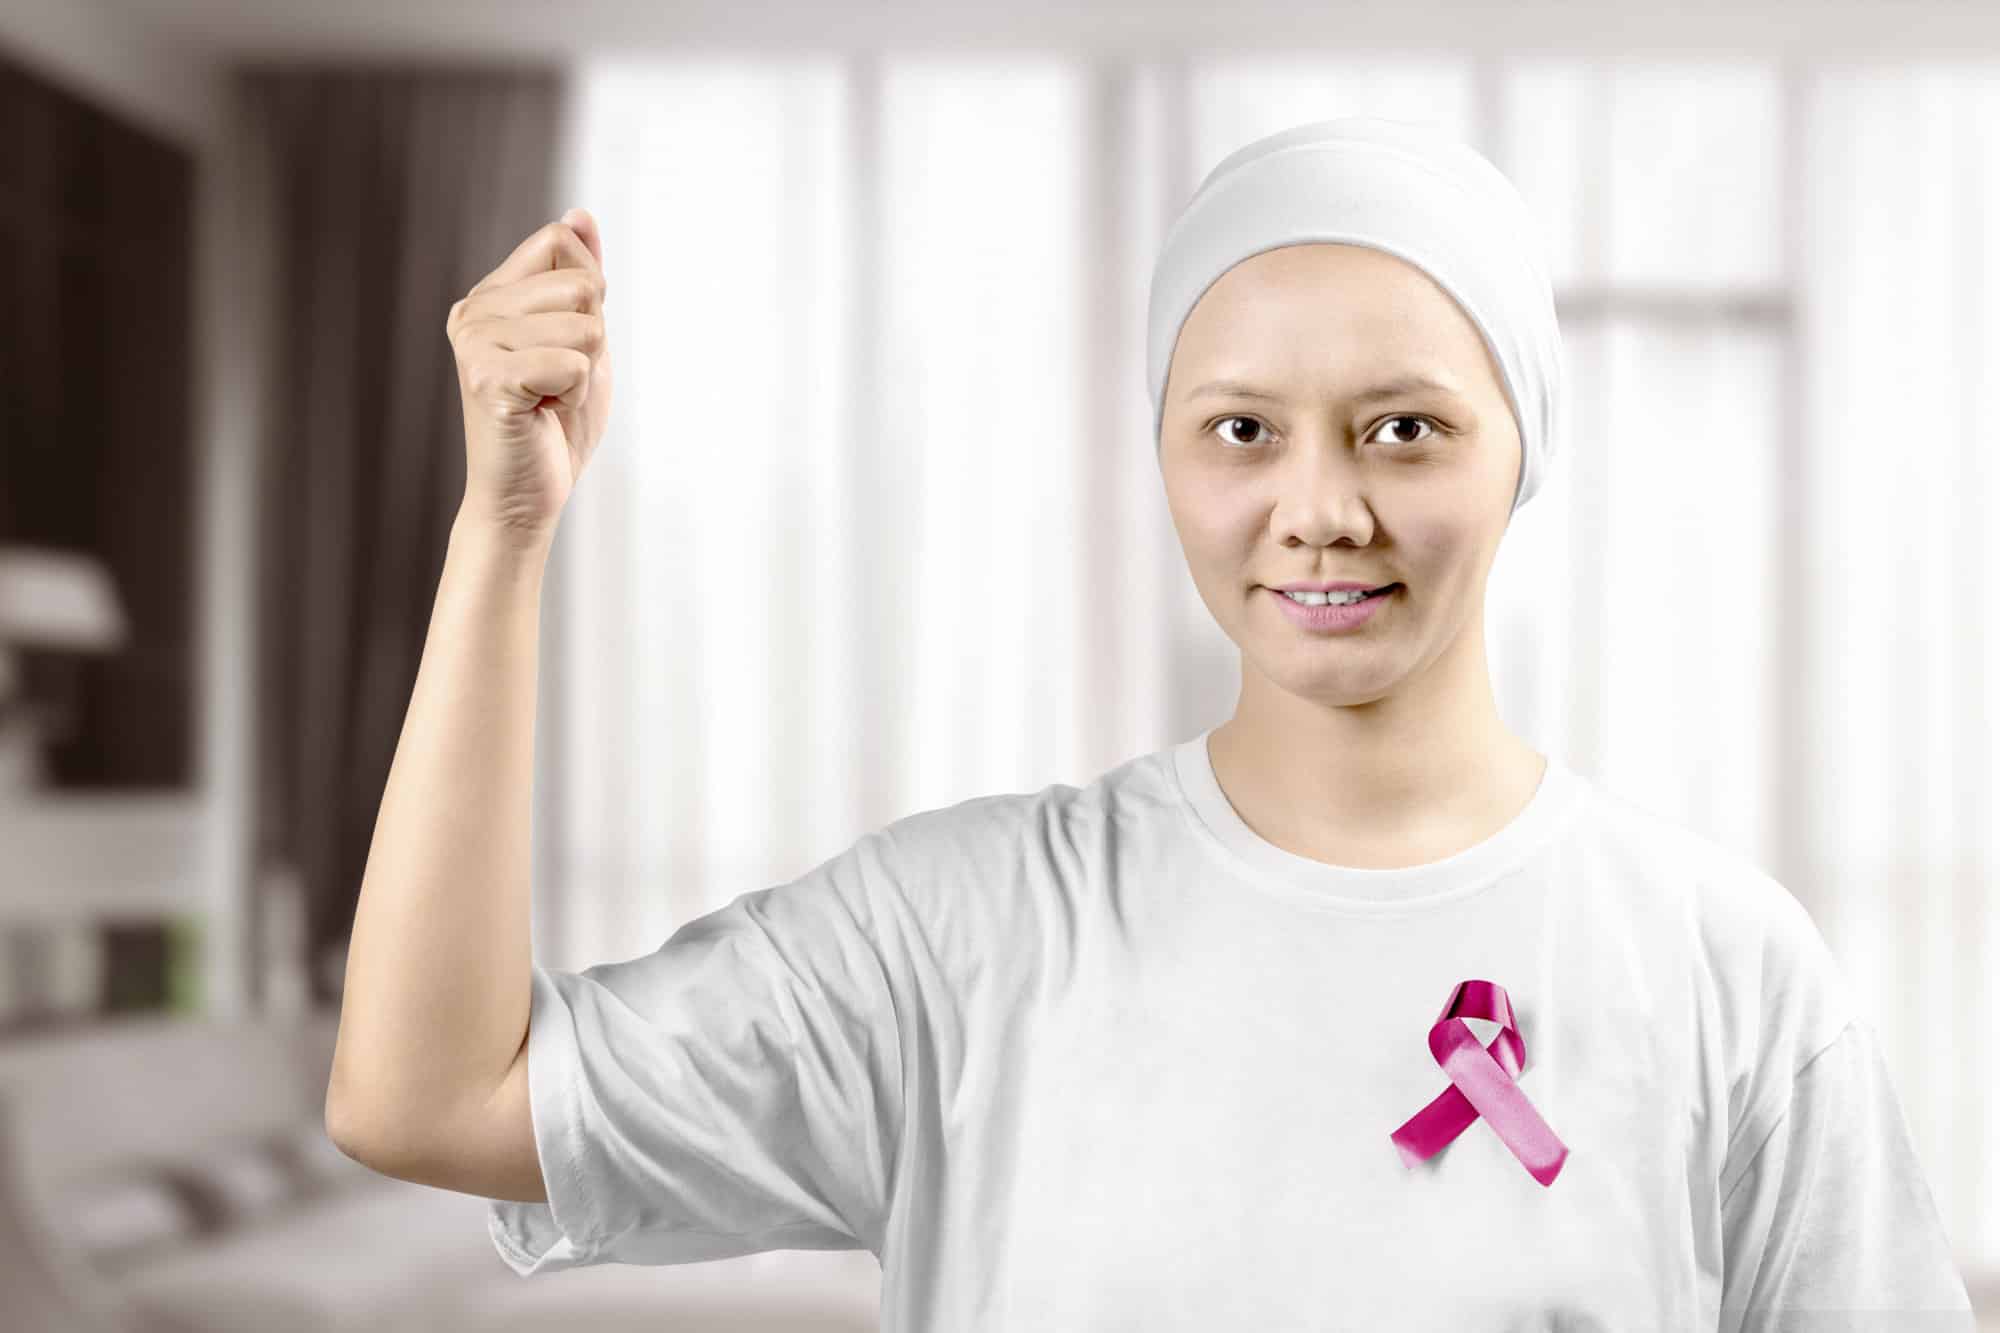 Image showing woman with cancer